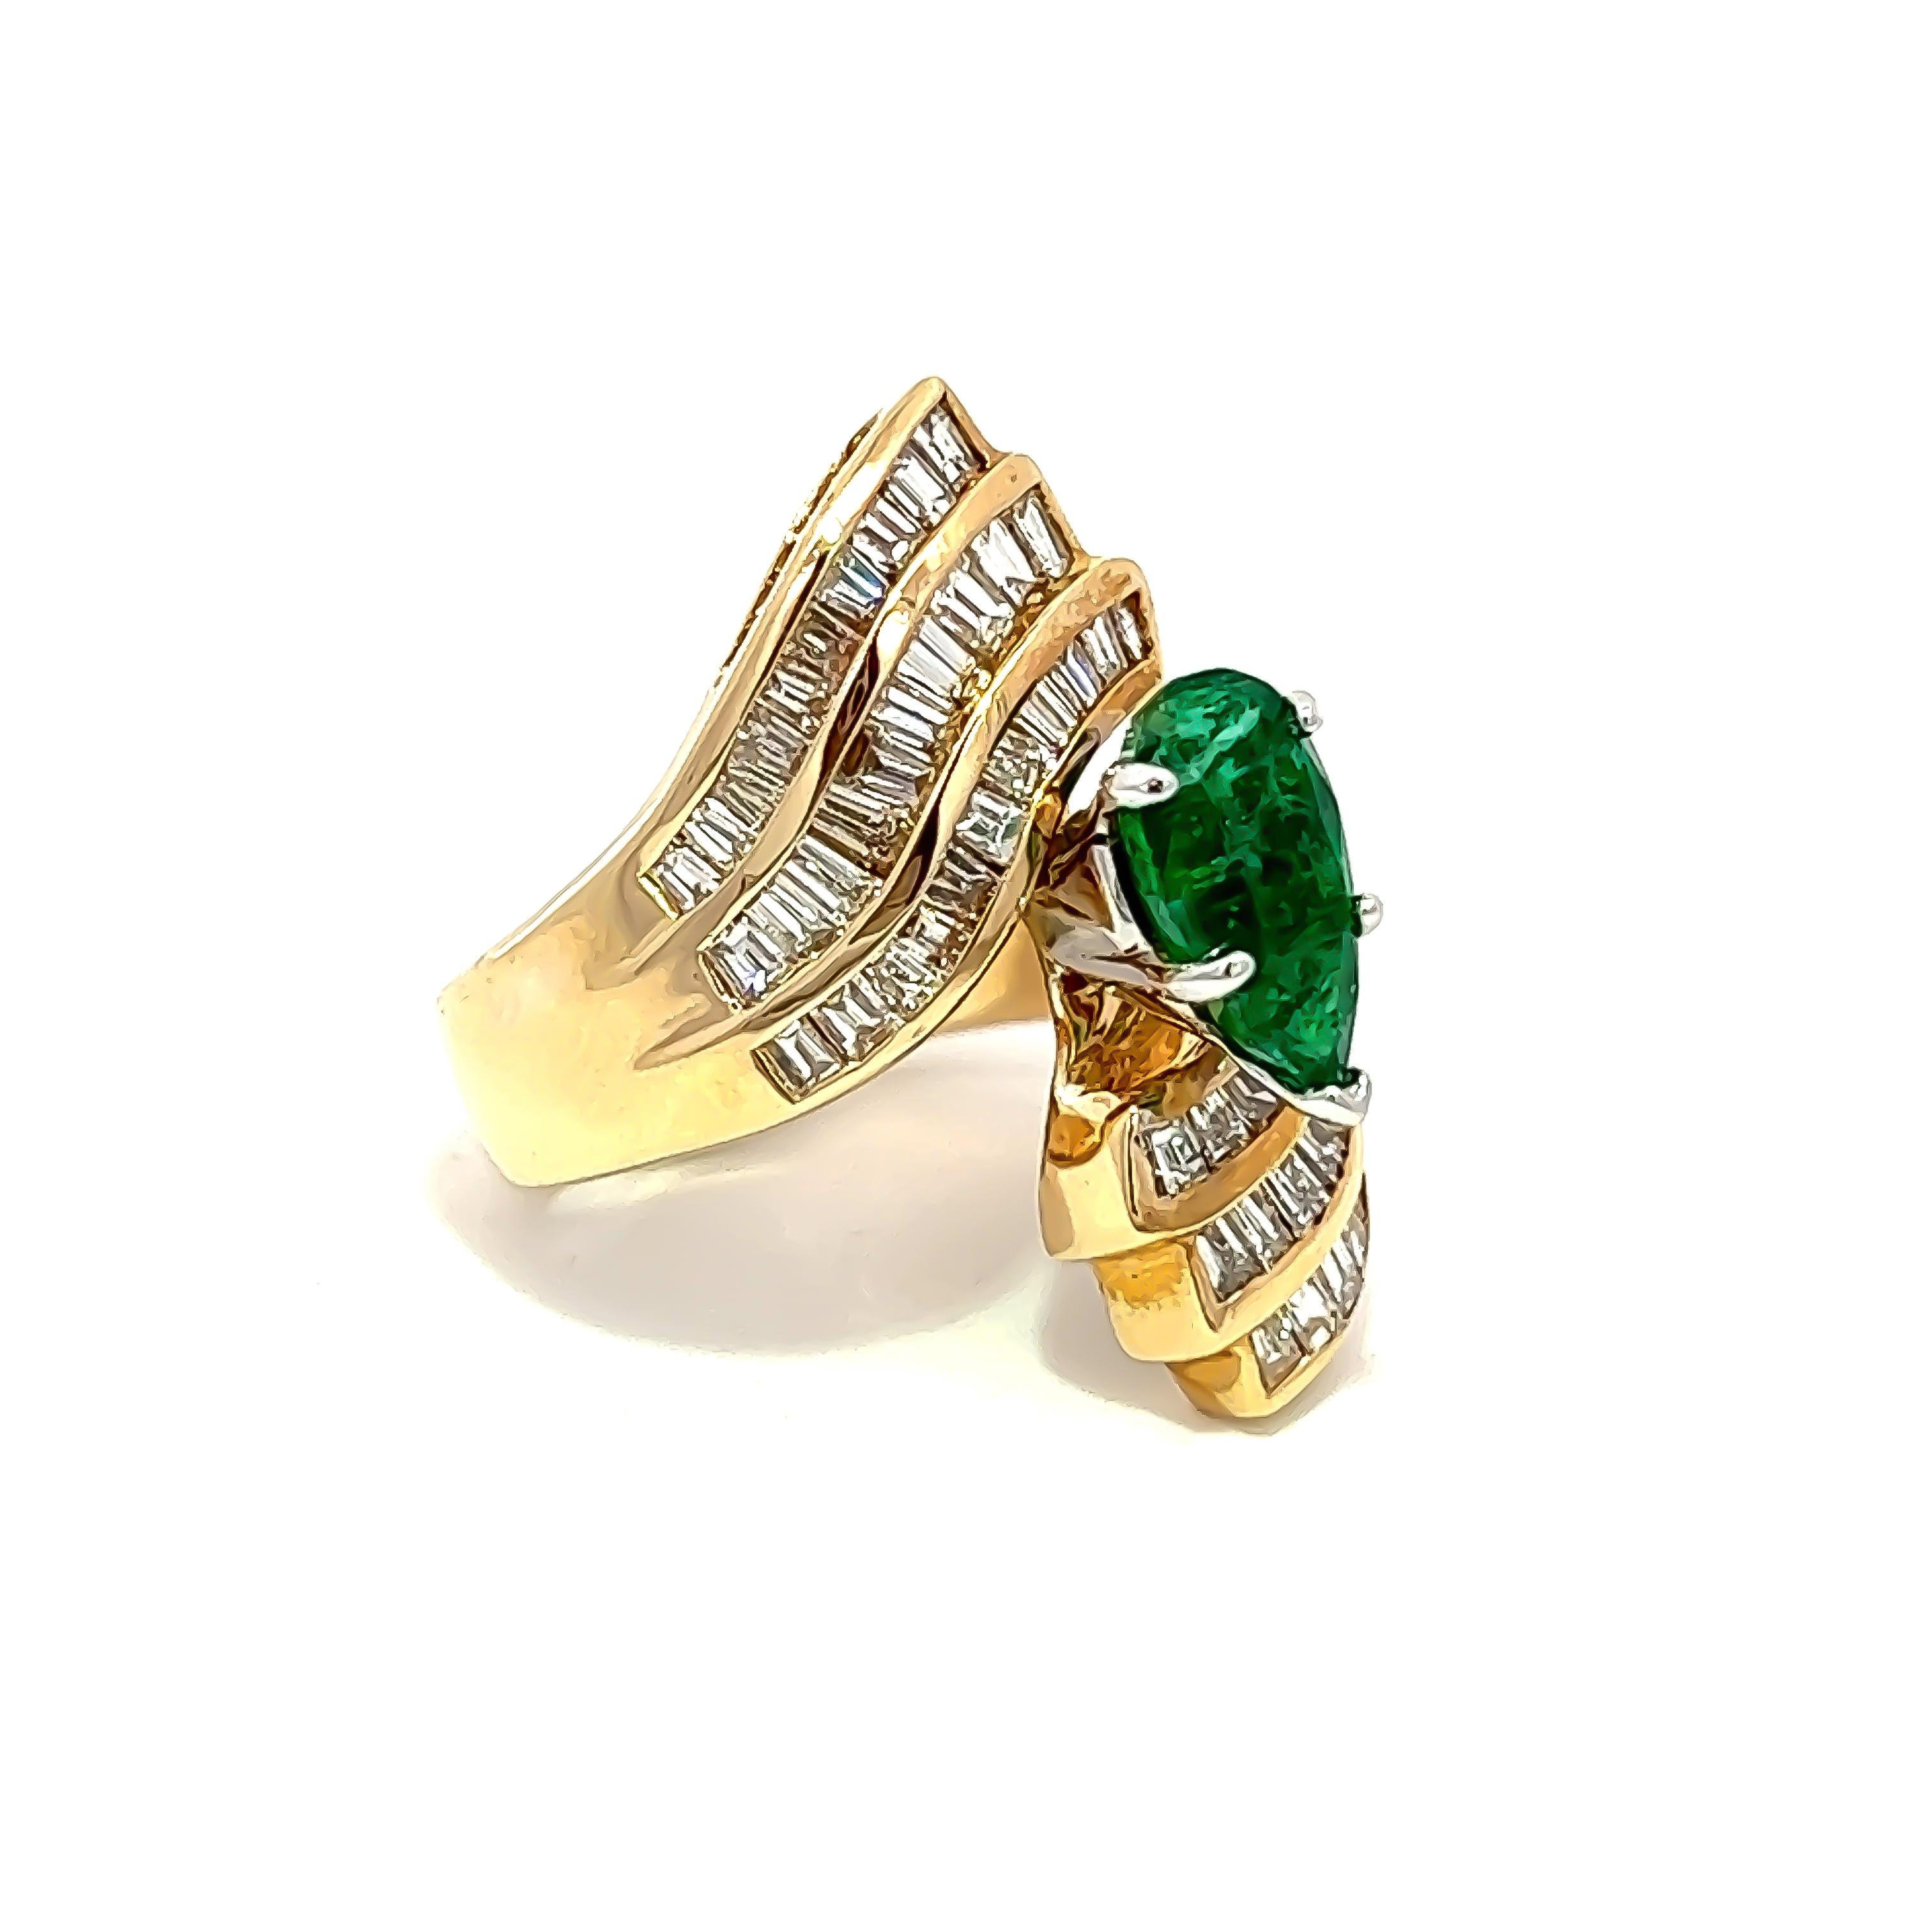 Indulge in luxury with this impeccable cocktail ring, skillfully crafted from 14k yellow gold and adorned with a breathtaking 1.53ct Emerald centerpiece. The ring is beautifully accented with 2.10CT Baguette diamonds that elegantly encircle both the